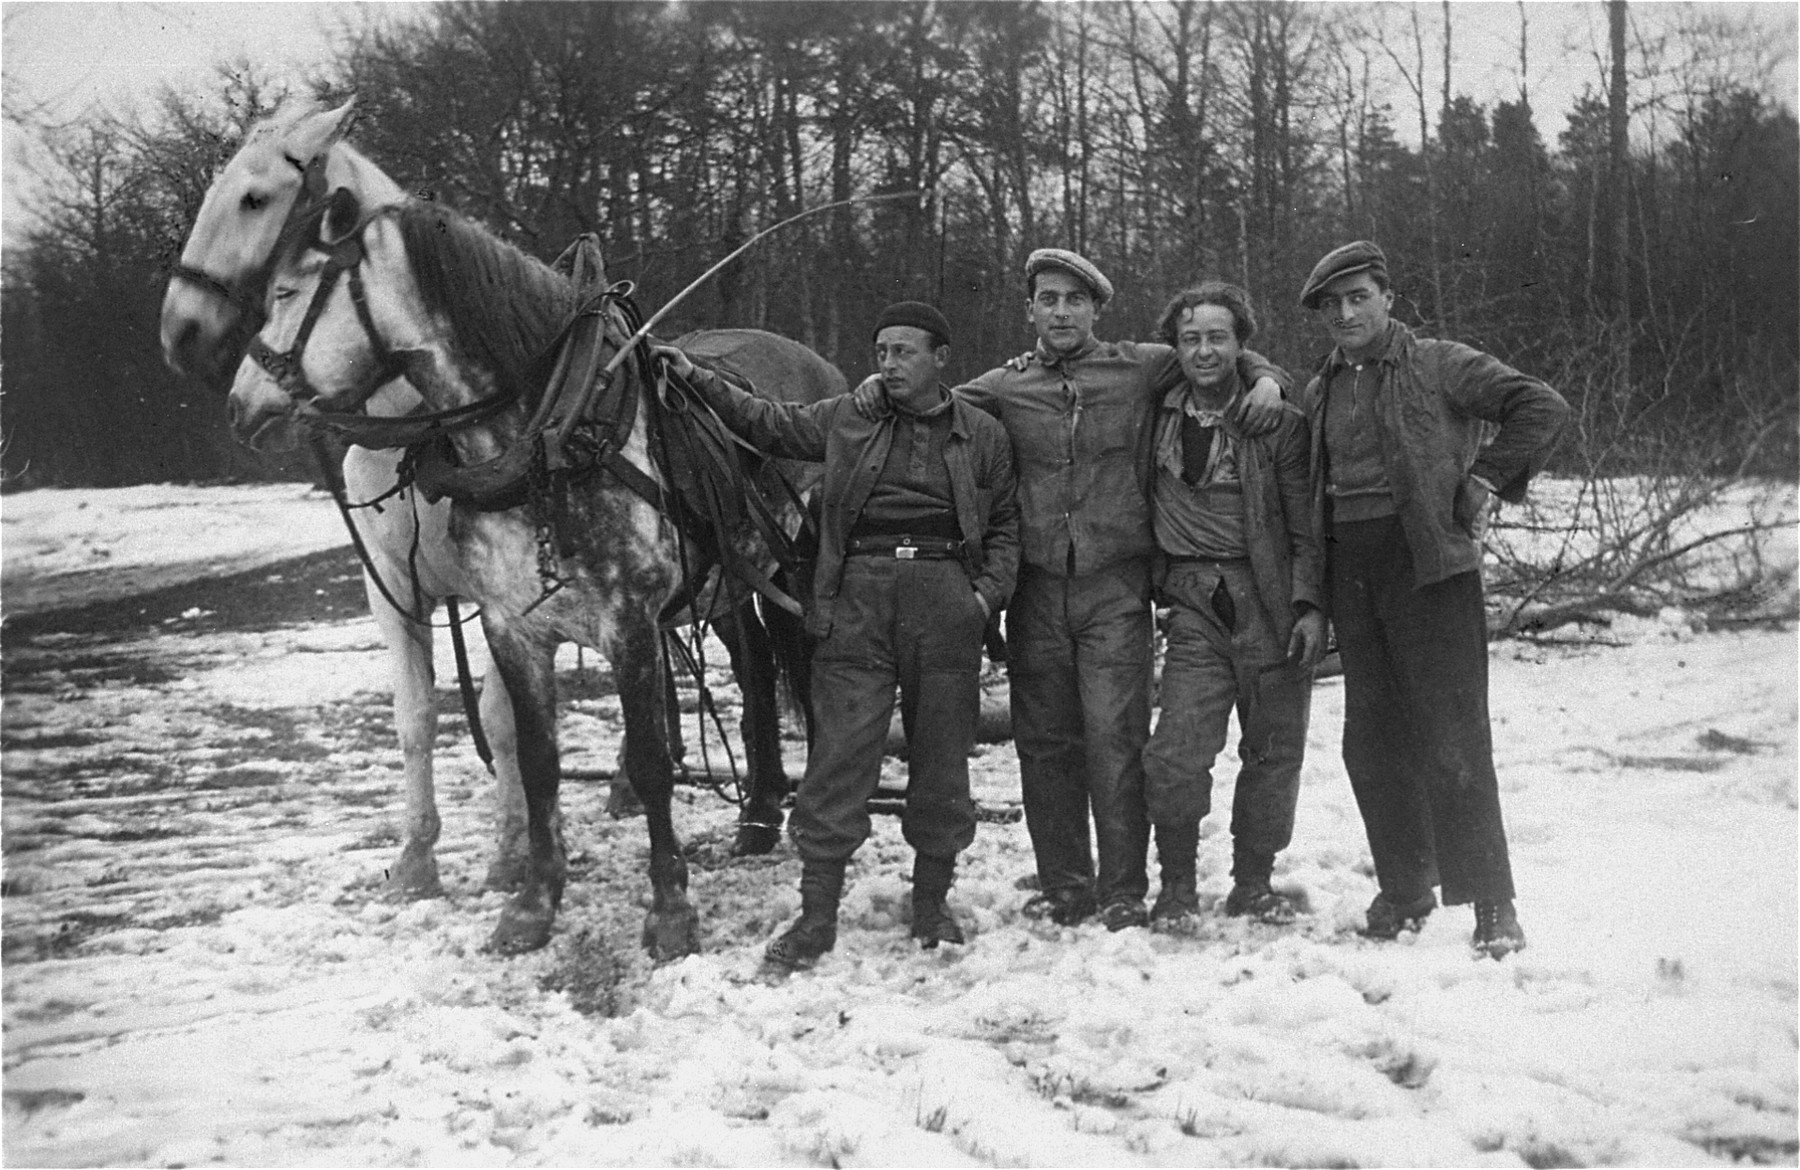 German and Austrian Jewish refugees, who have been detained in a Swiss labor camp, pose next to the horse they use in their road construction work.